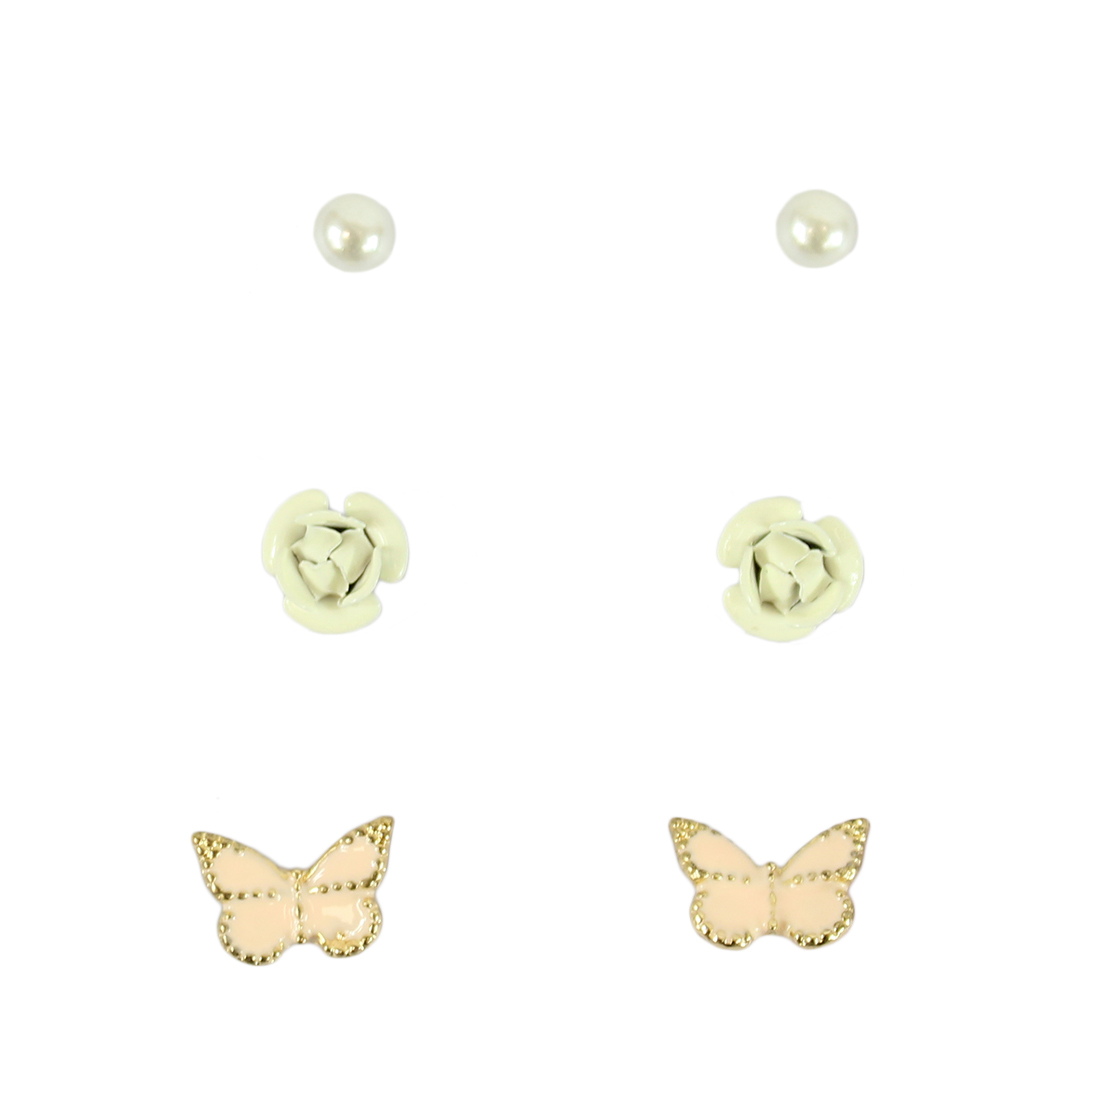 Three Pears -Pearls, Flower & Butterfly